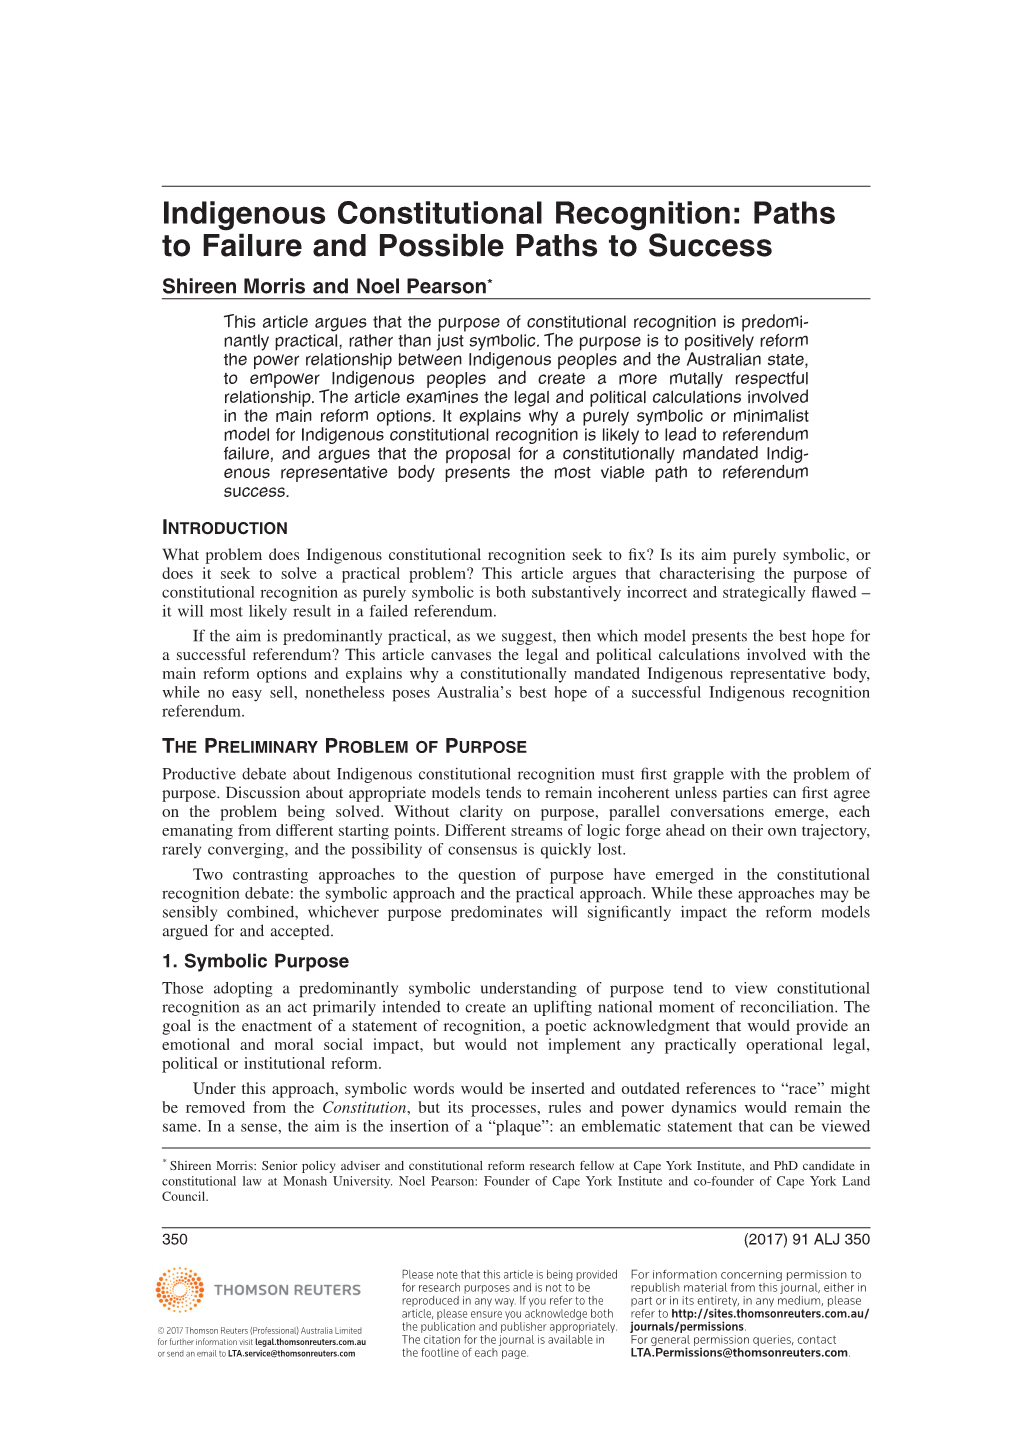 Indigenous Constitutional Recognition: Paths to Failure and Possible Paths to Success Shireen Morris and Noel Pearson*